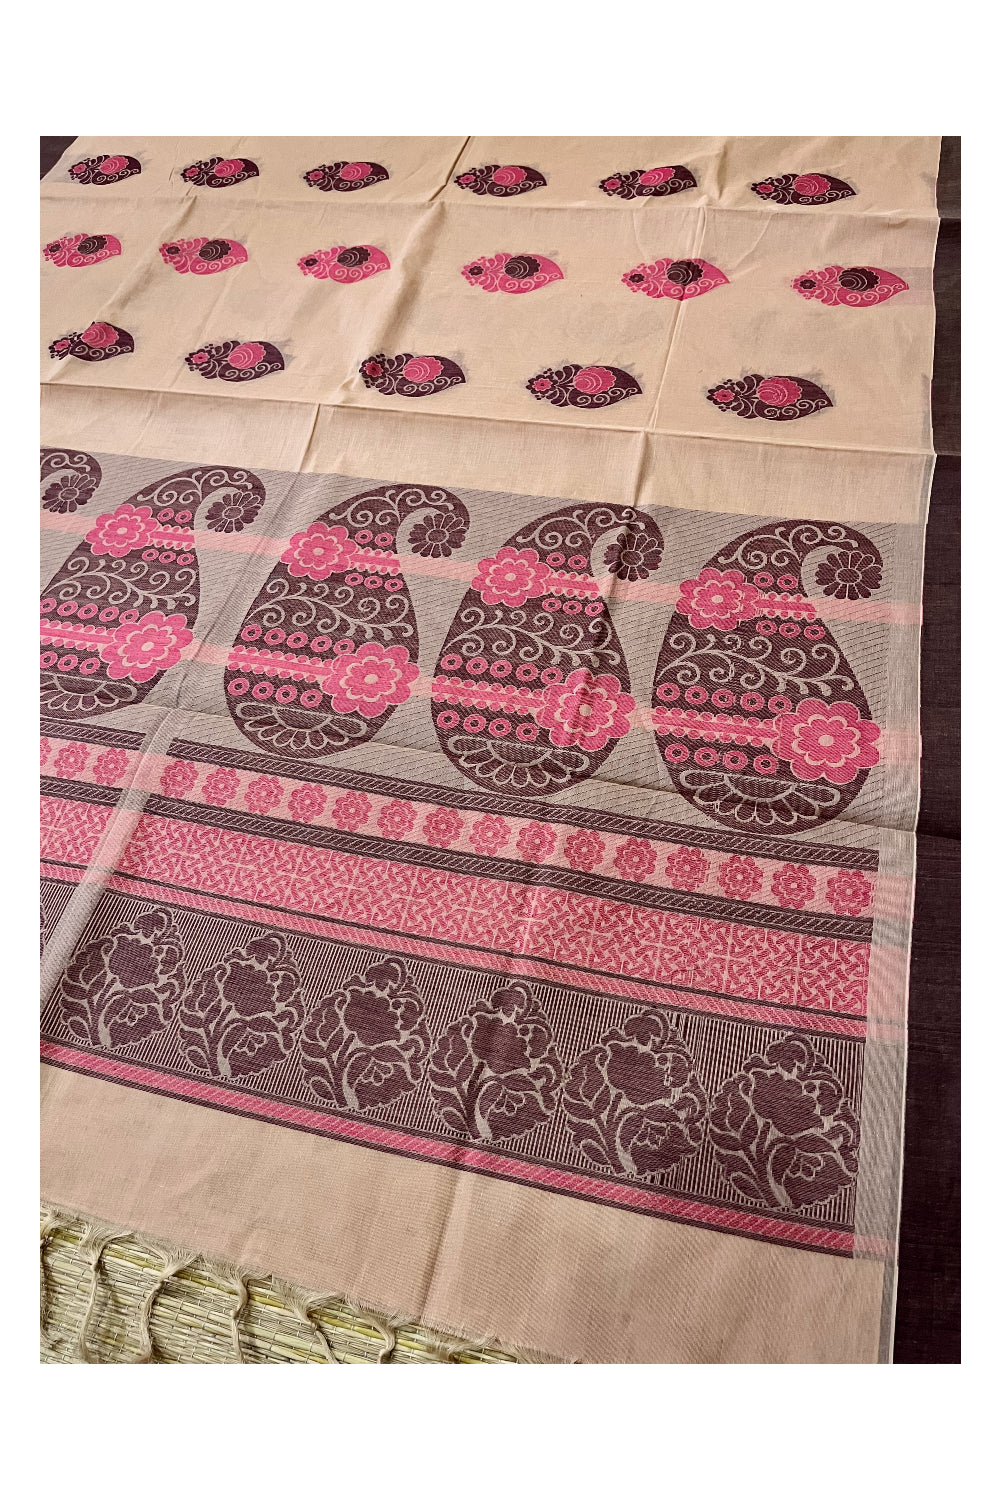 Southloom Brown Cotton Saree with Woven Designs